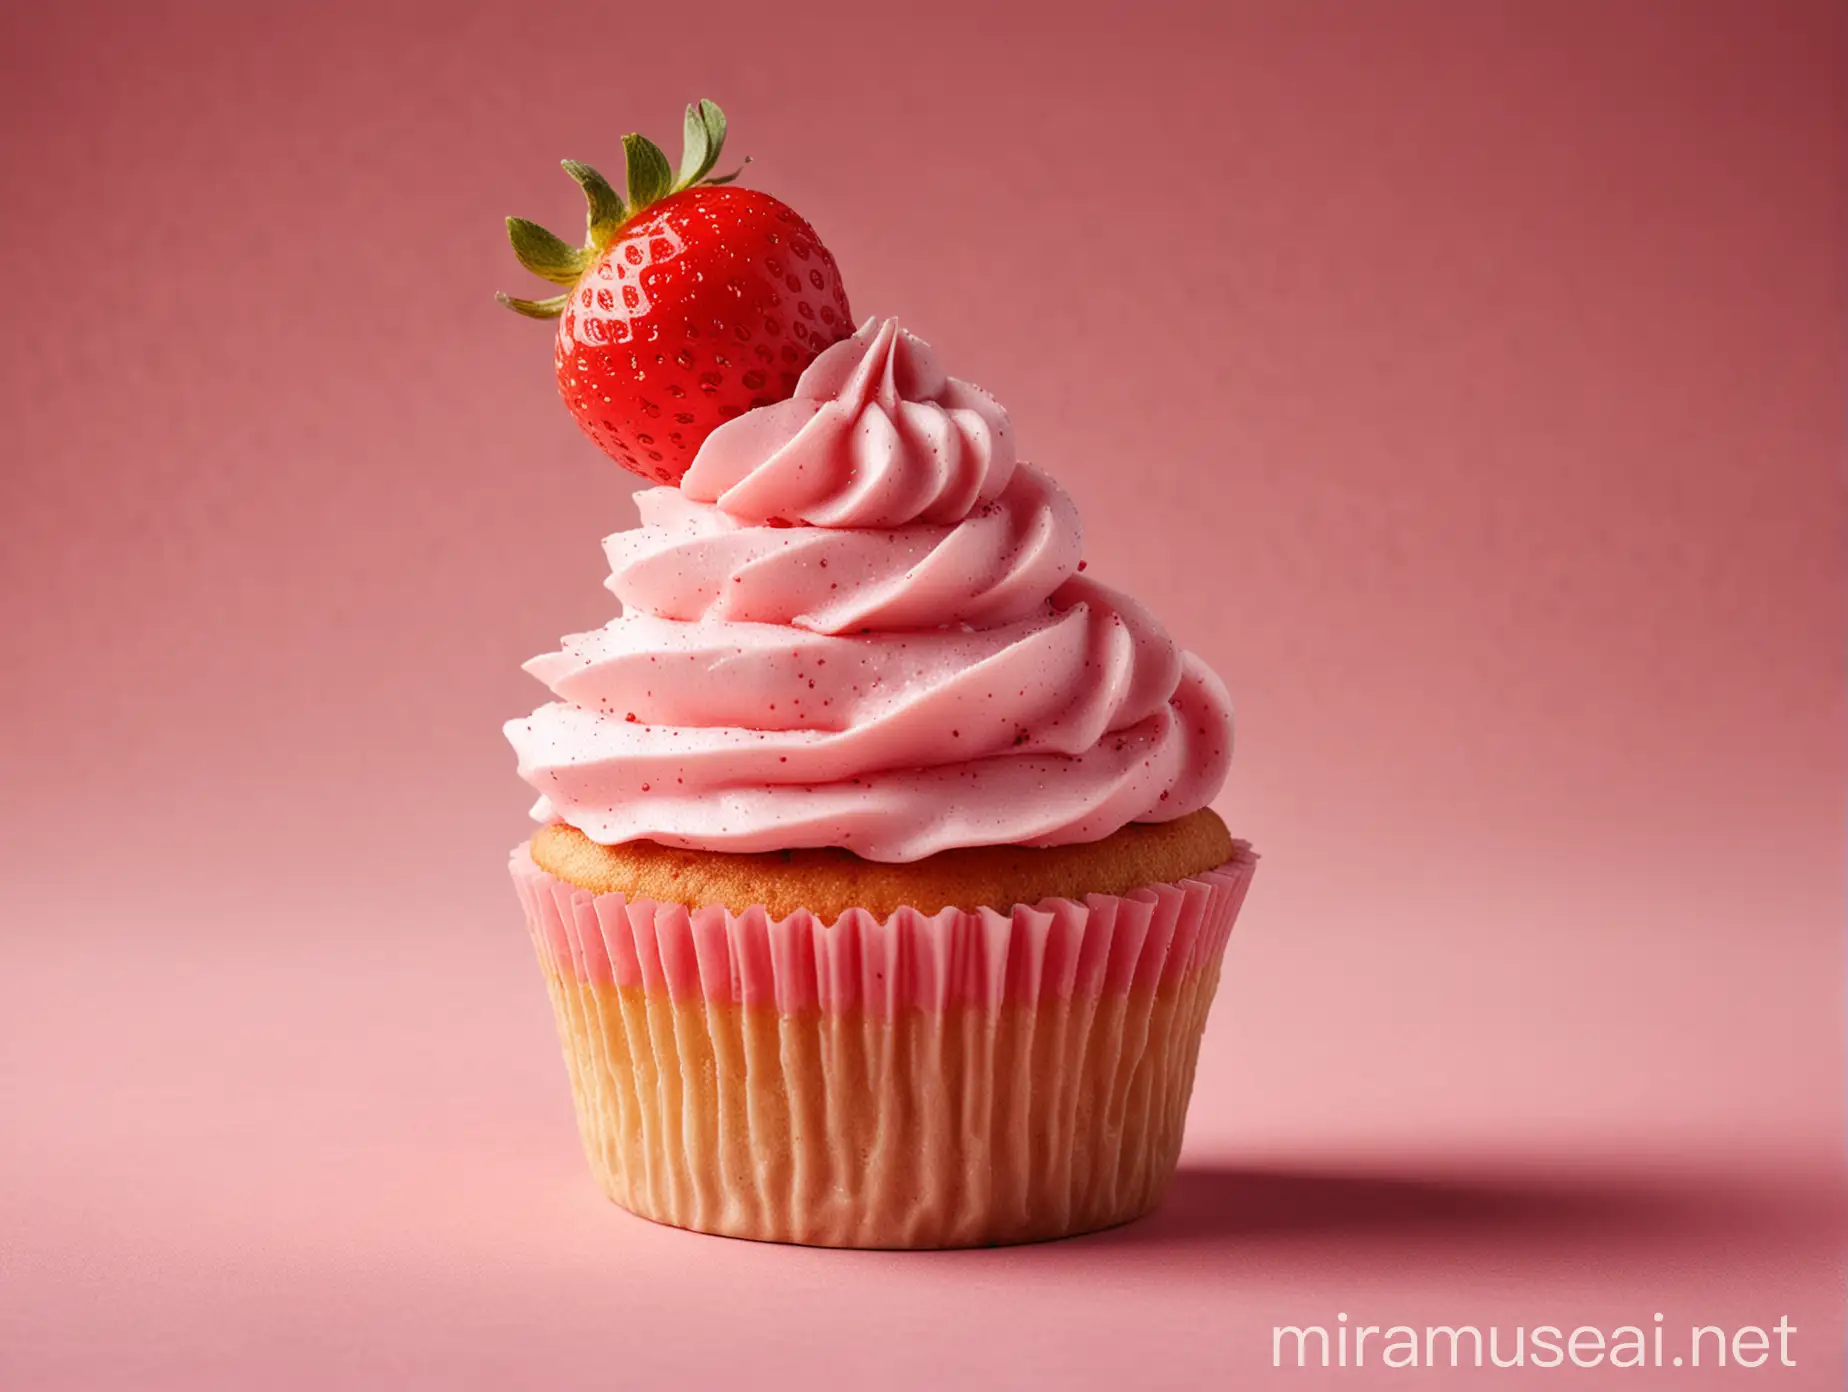 The Image Shows side view of one Strawberry cupcake. The cupcake is set against an isolated background. It is the perfect cupcake with a symmetrical, geometric and beautiful shape.